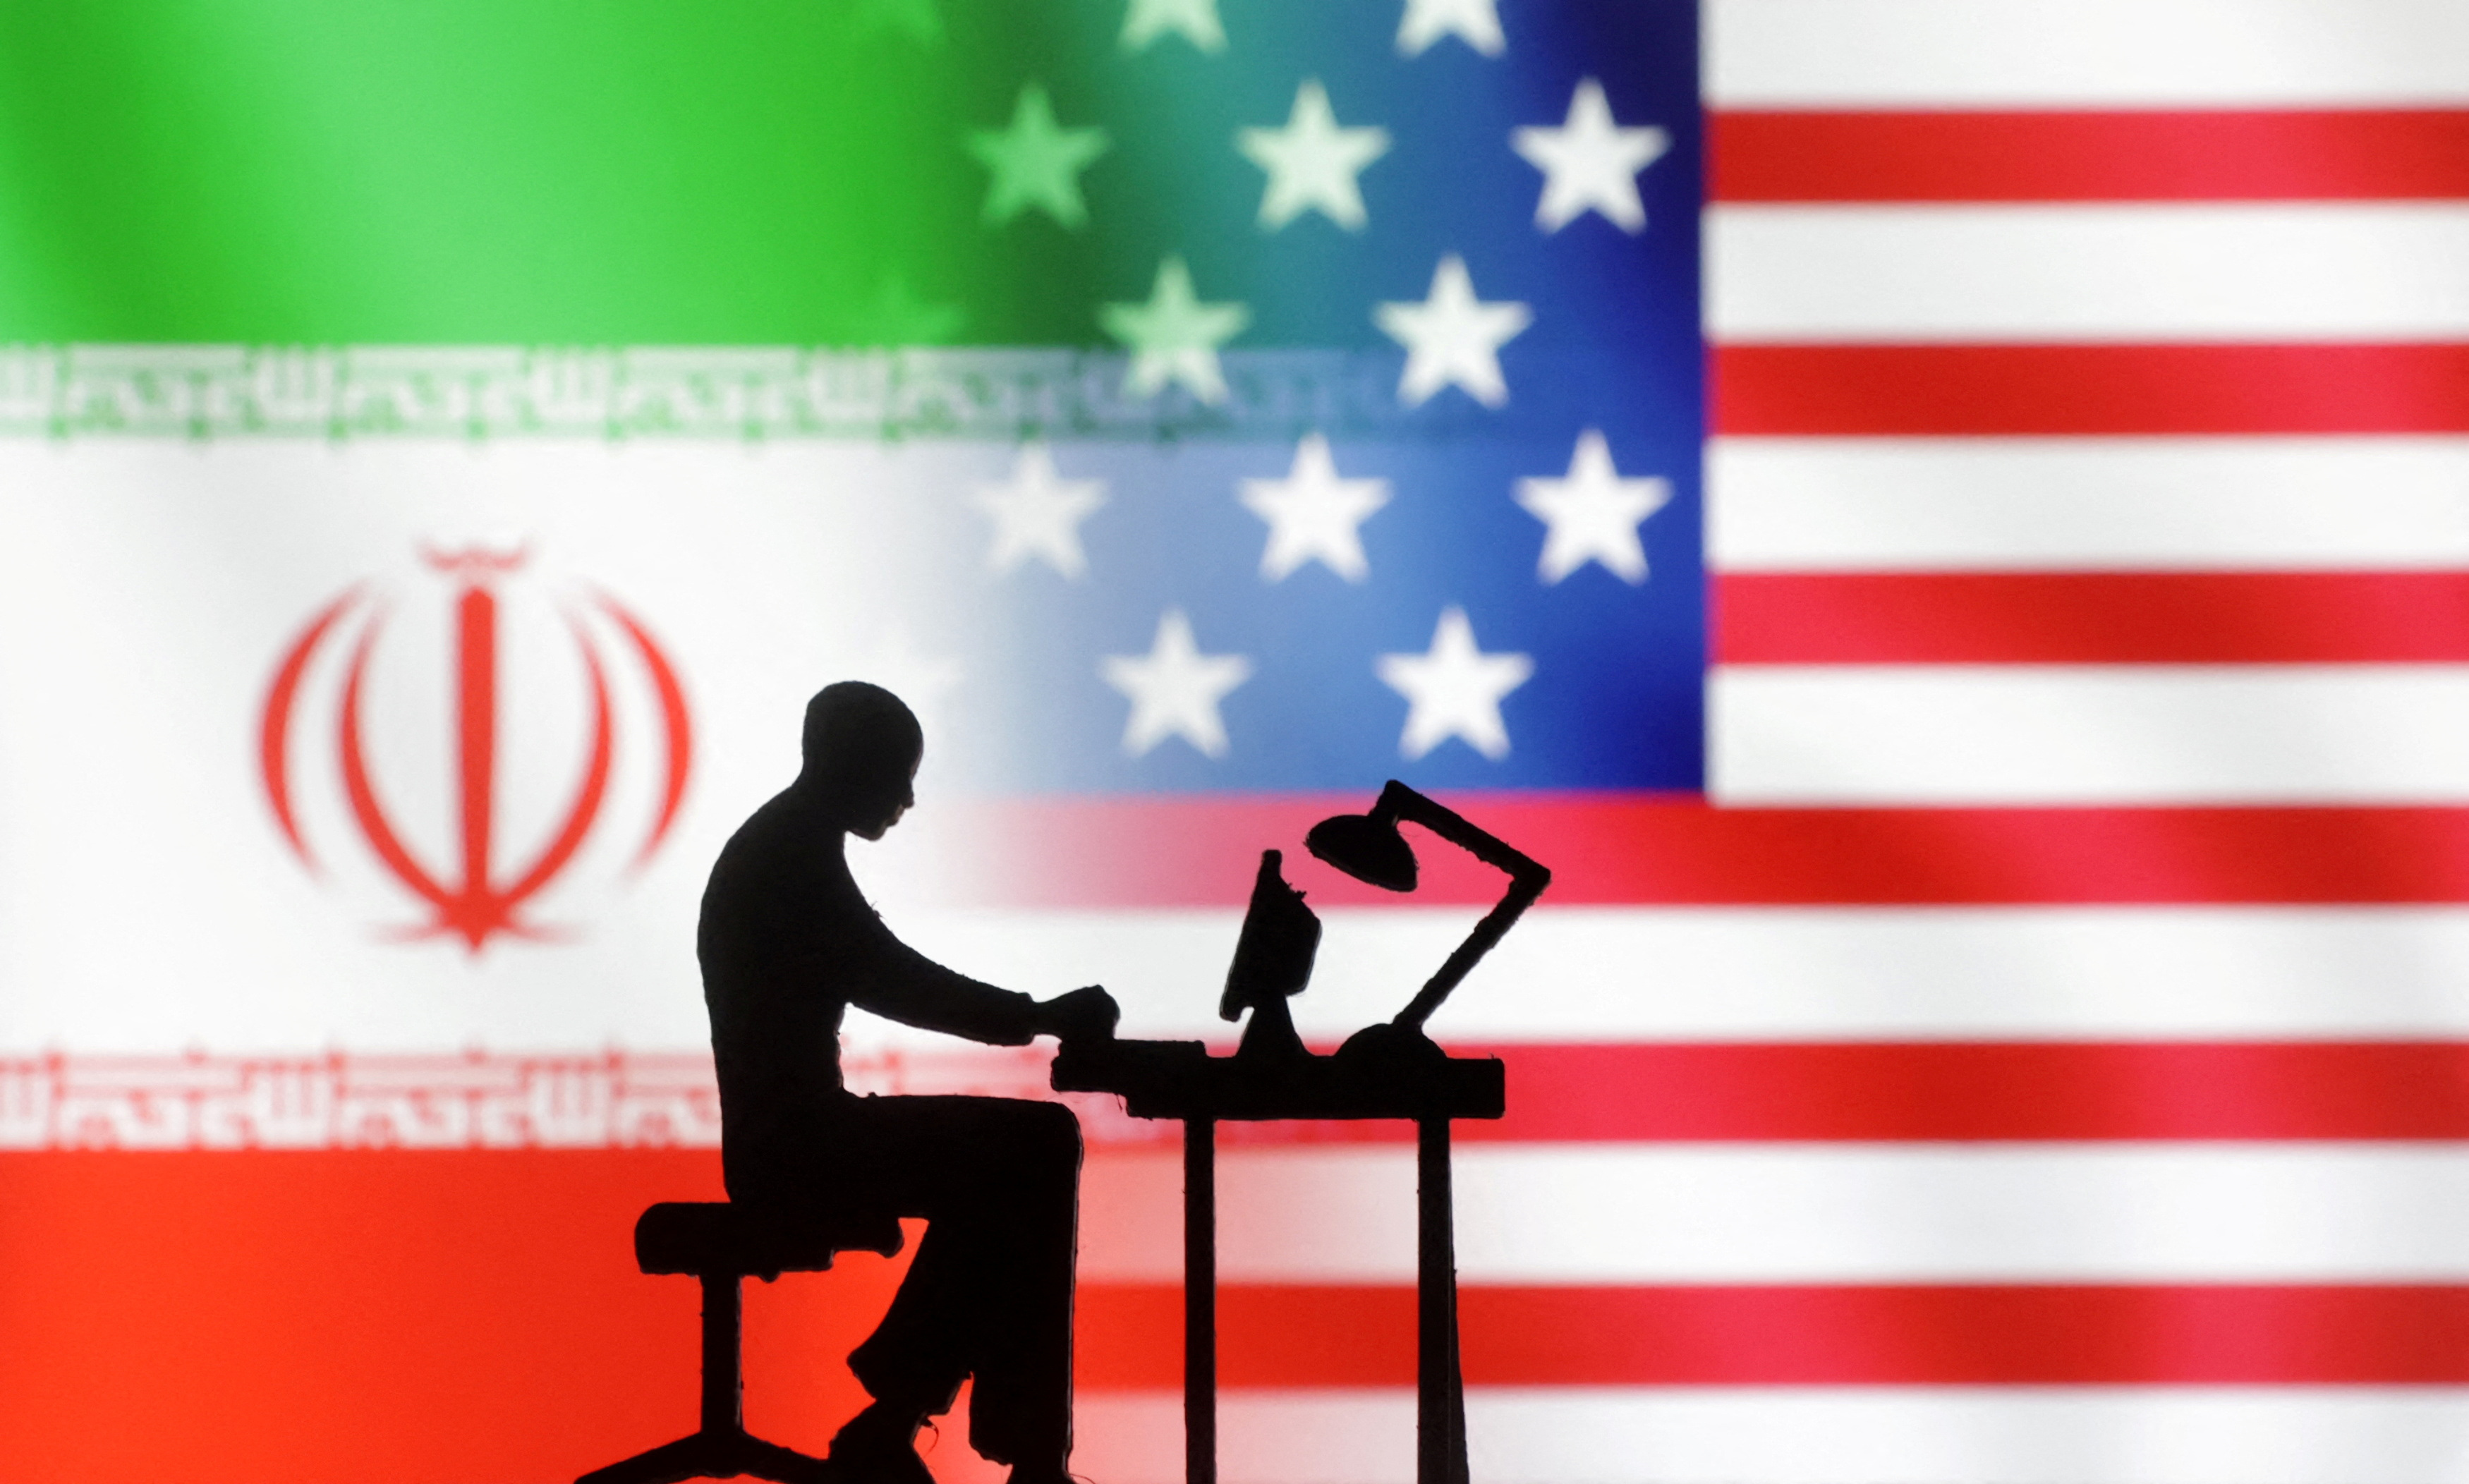 Illustration shows USA and Iran flags